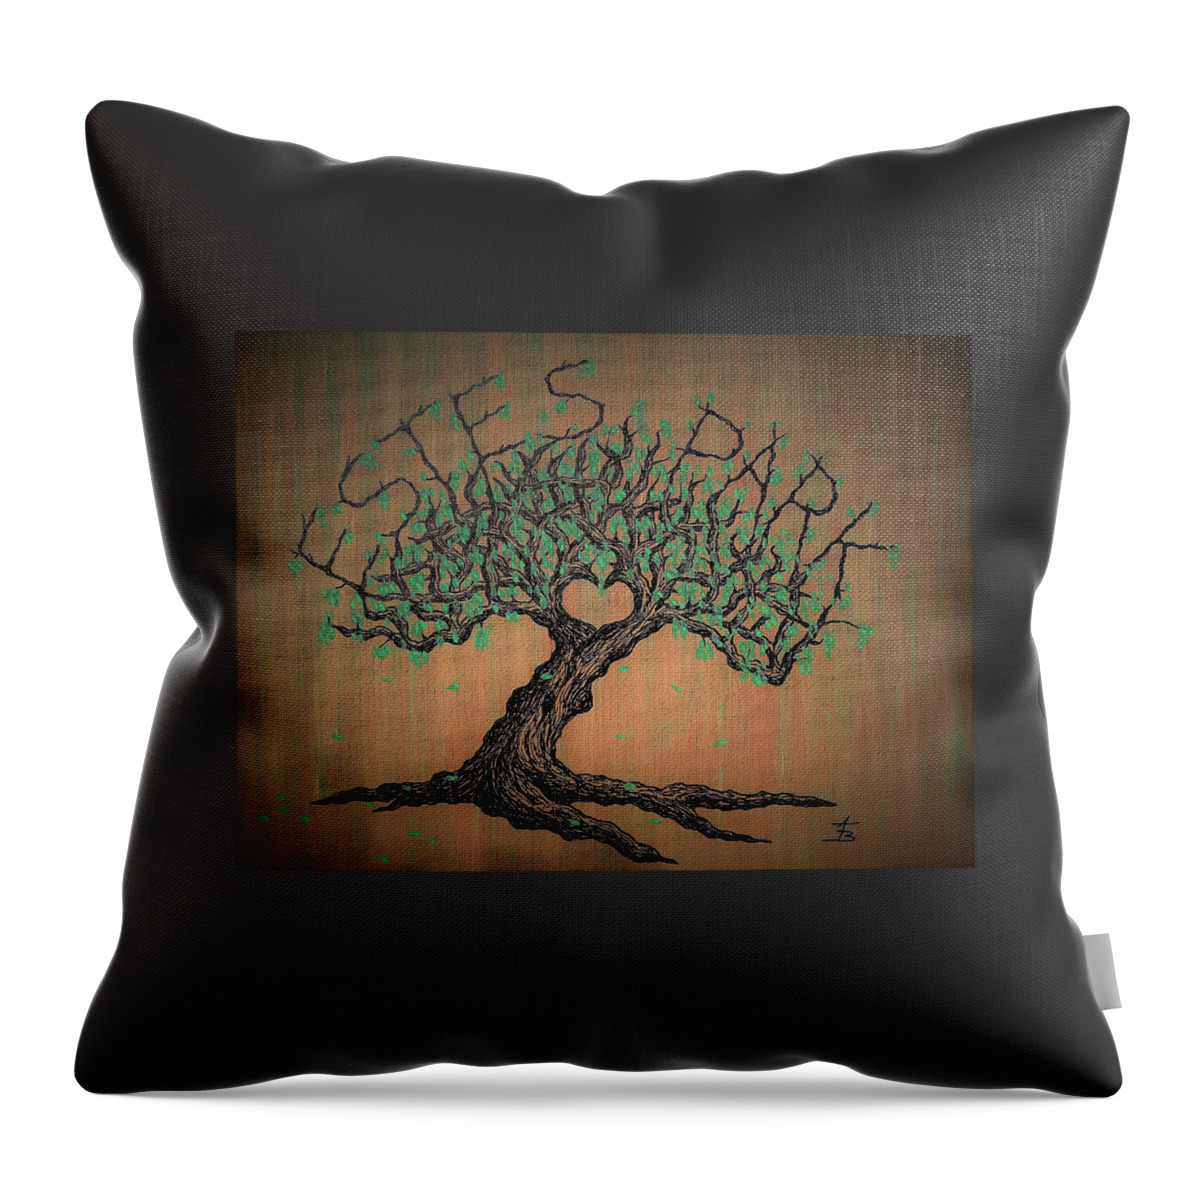 National Parks Throw Pillow featuring the drawing Estes Park Love Tree by Aaron Bombalicki